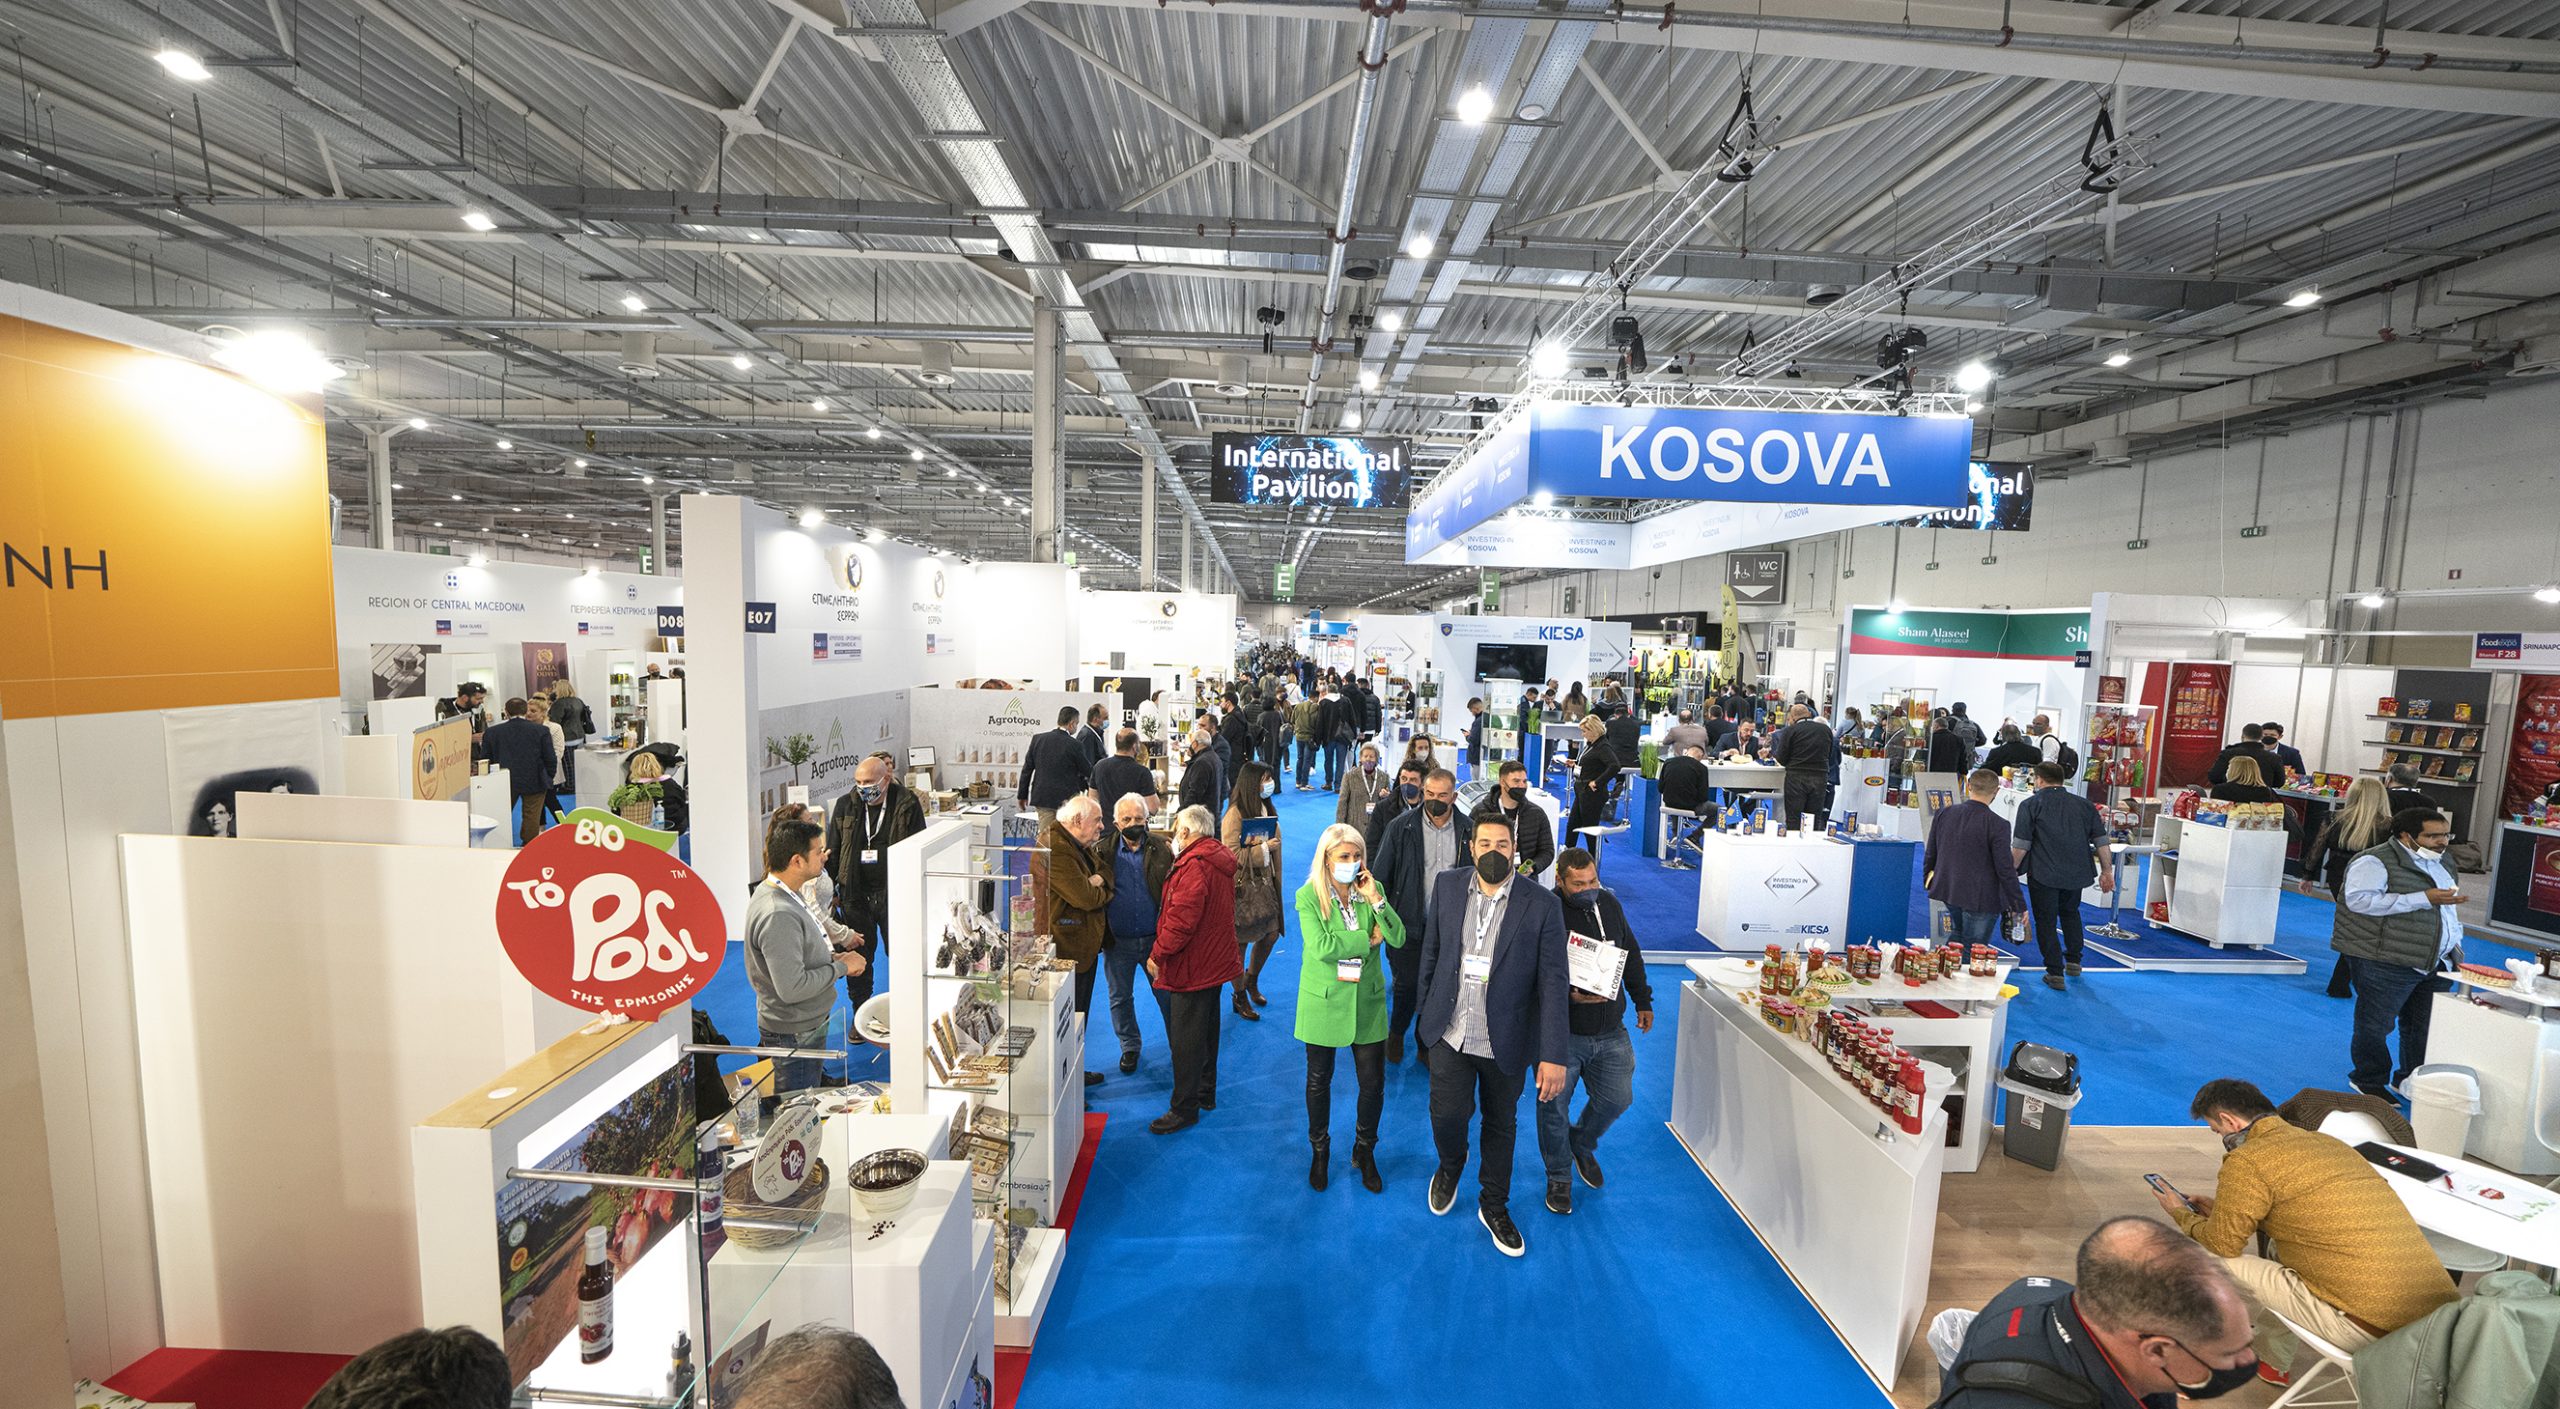 280 int’l exhibitors from 40 countries